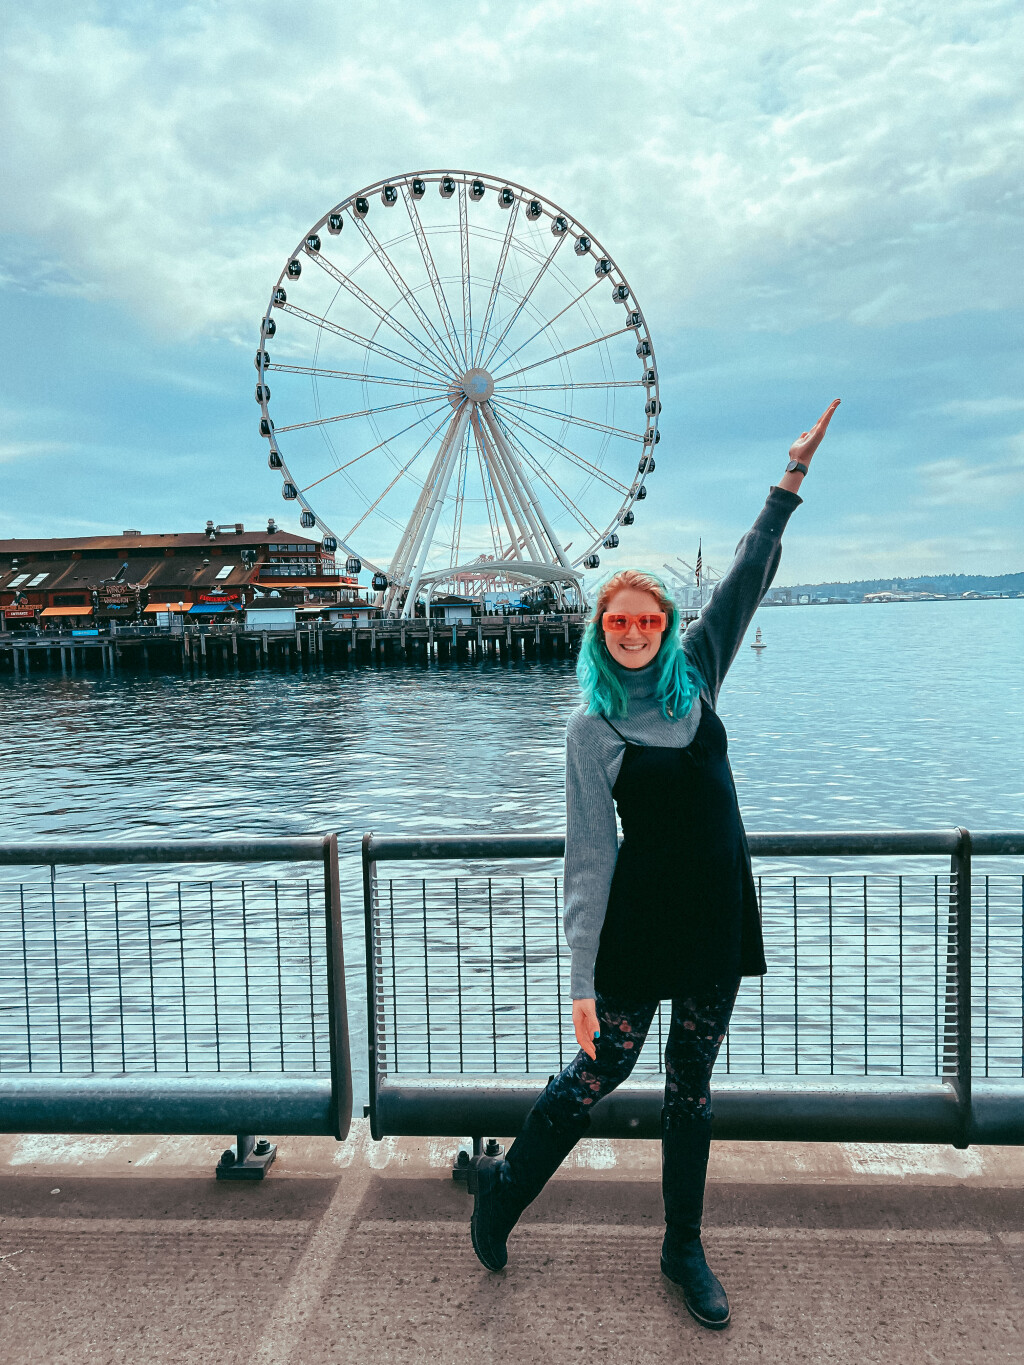 Beth's wearing a little black dress over a gray turtleneck, standing in front of the Seattle Wheel